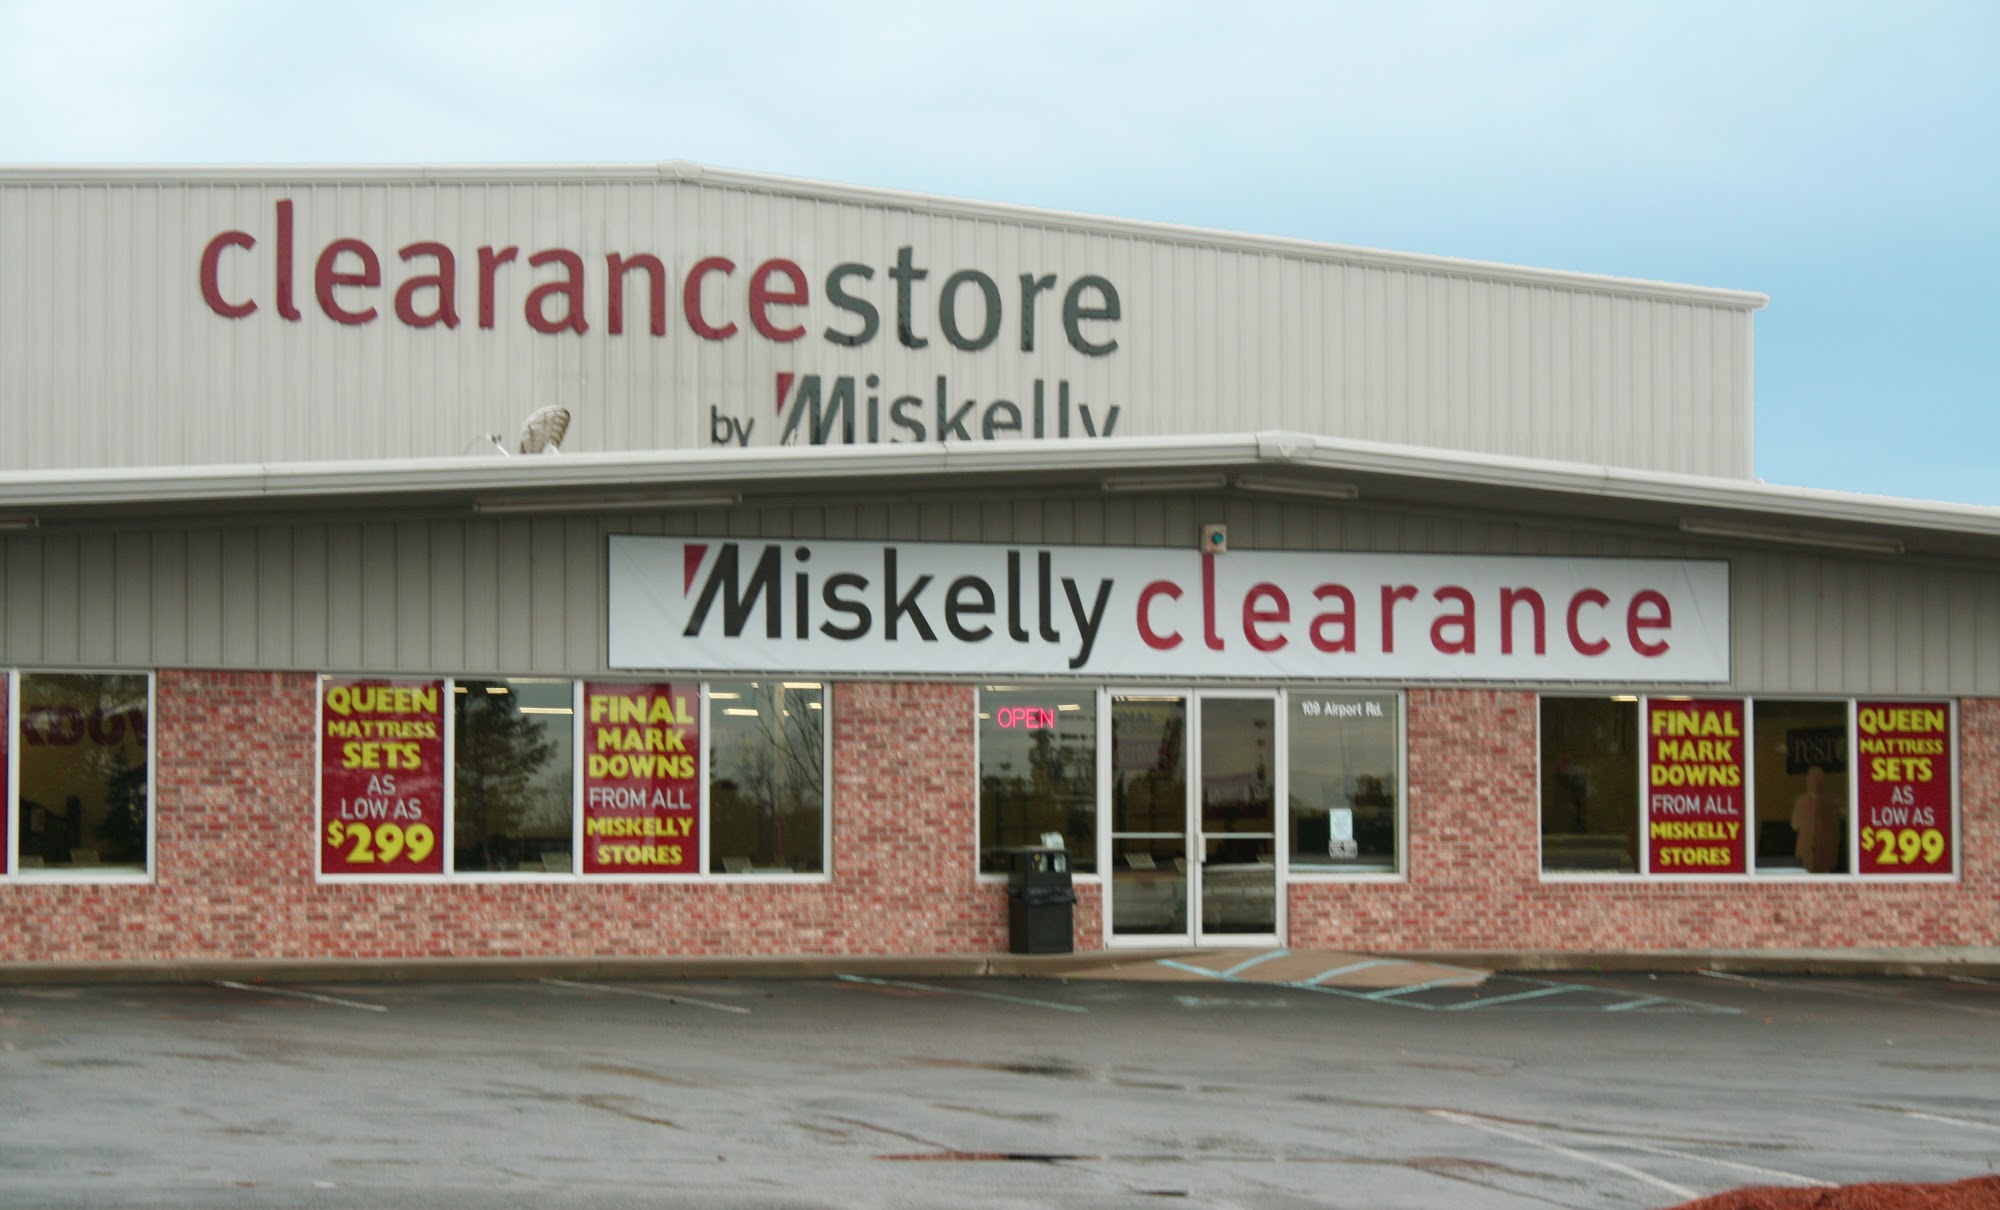 Miskelly Clearancestore